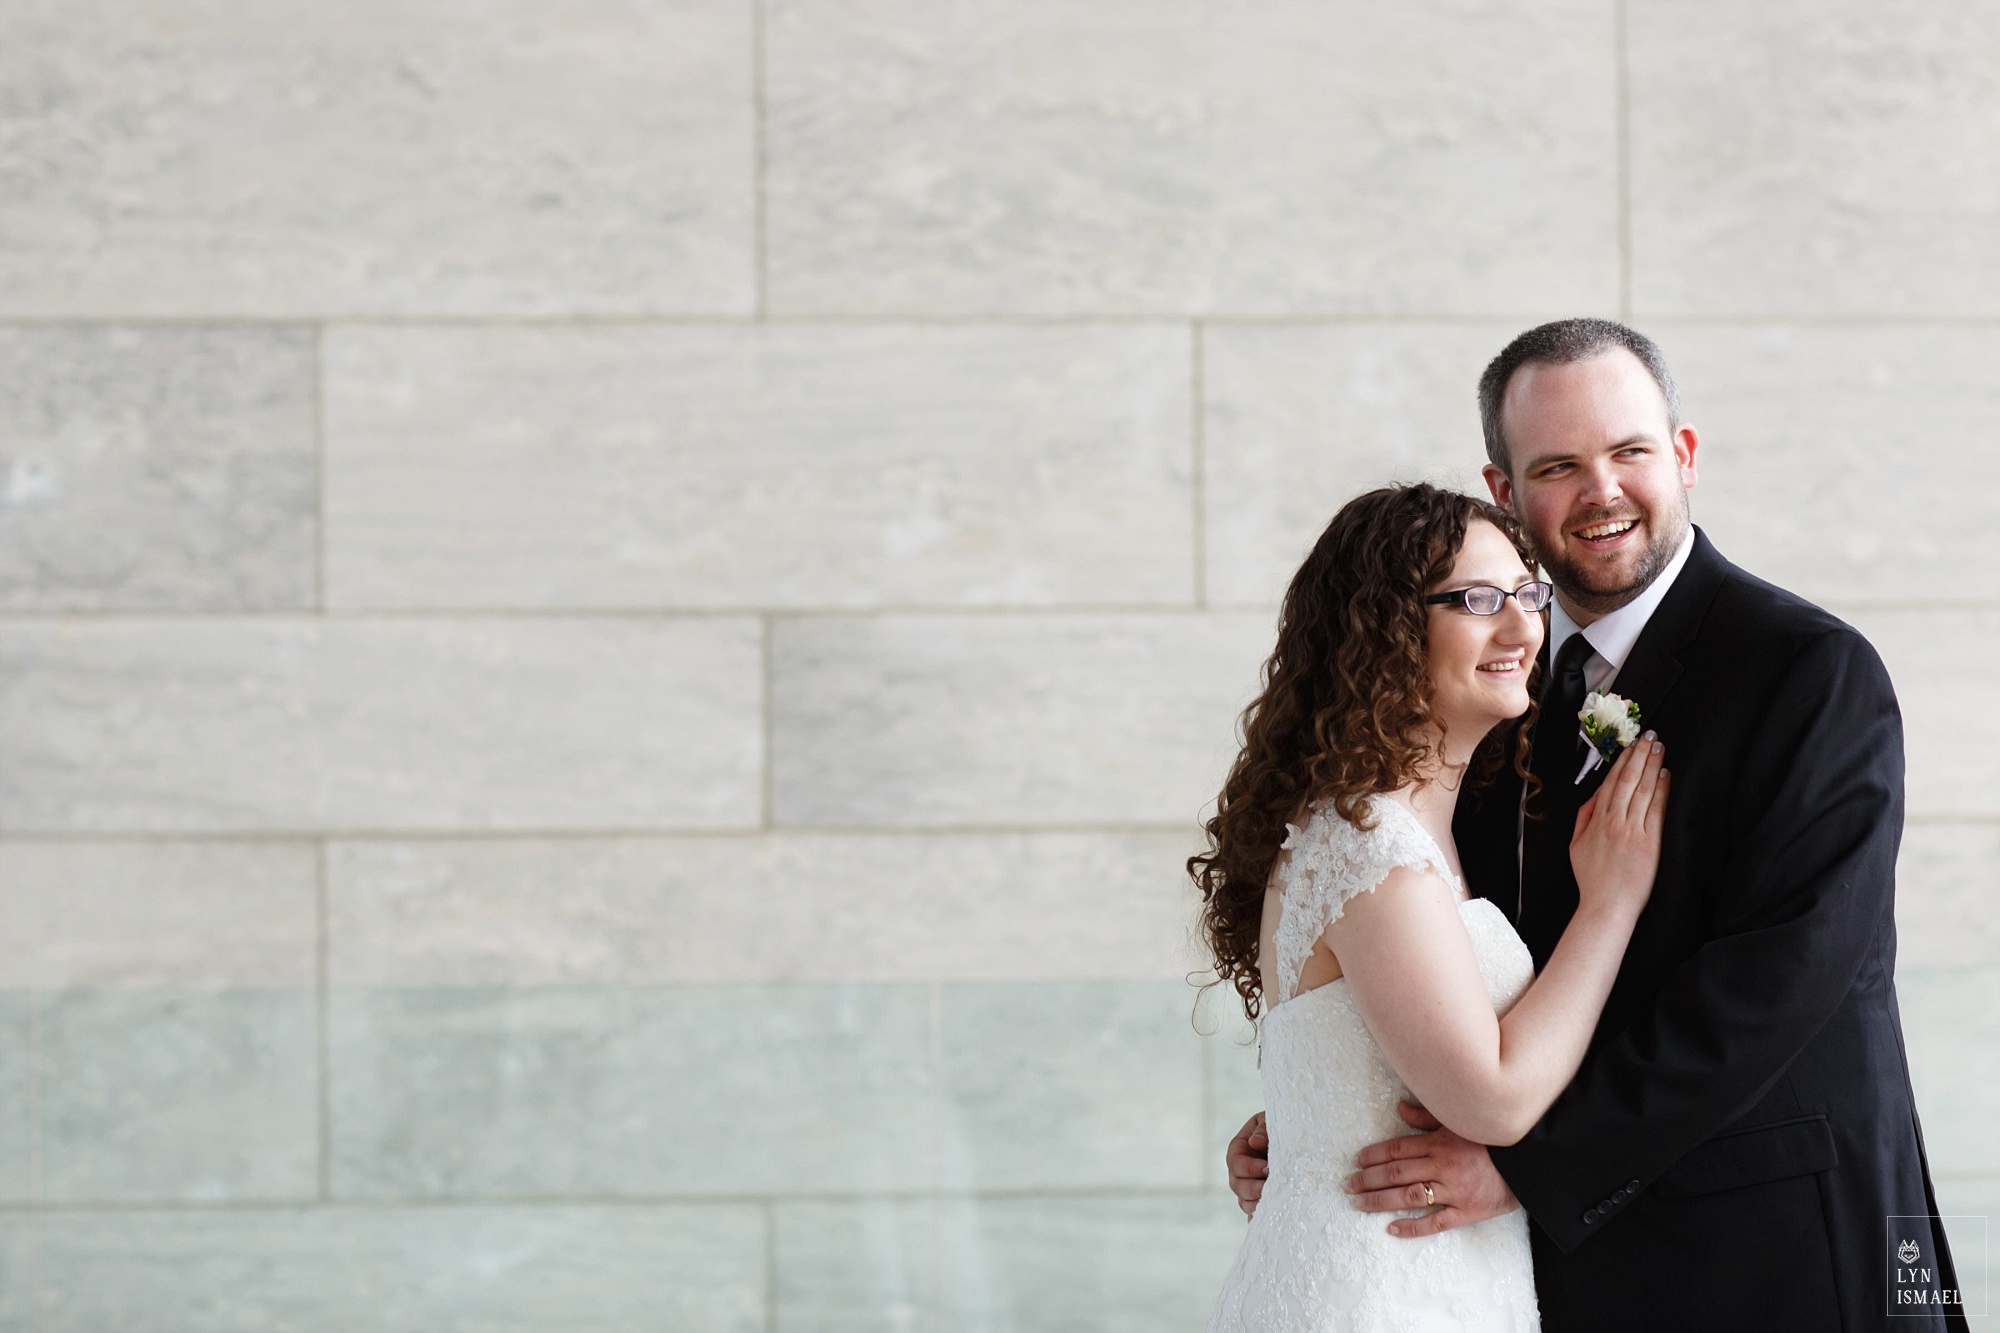 Portrait of a bride and groom who got married in Wellesley, Ontario.